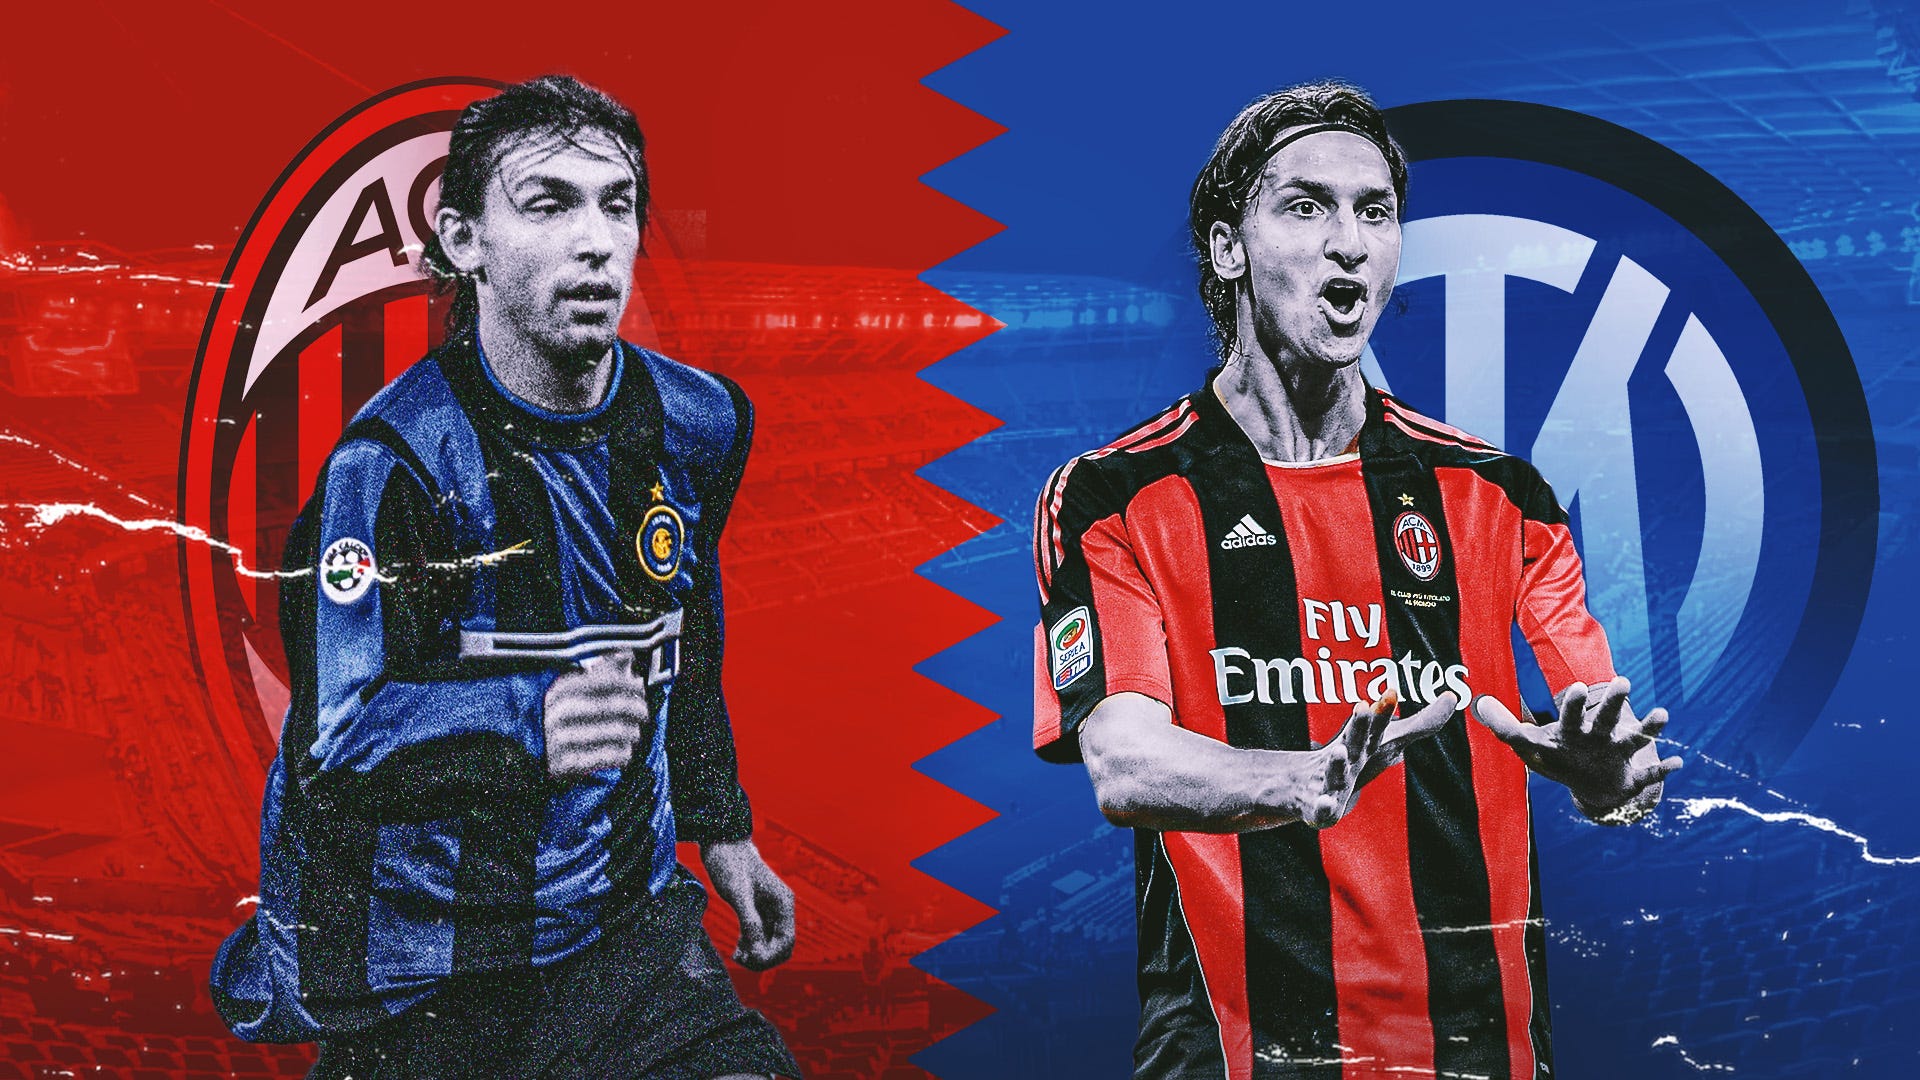 From Zlatan Ibrahimovic to Andrea Pirlo - Meet the players who played for both AC Milan and Inter